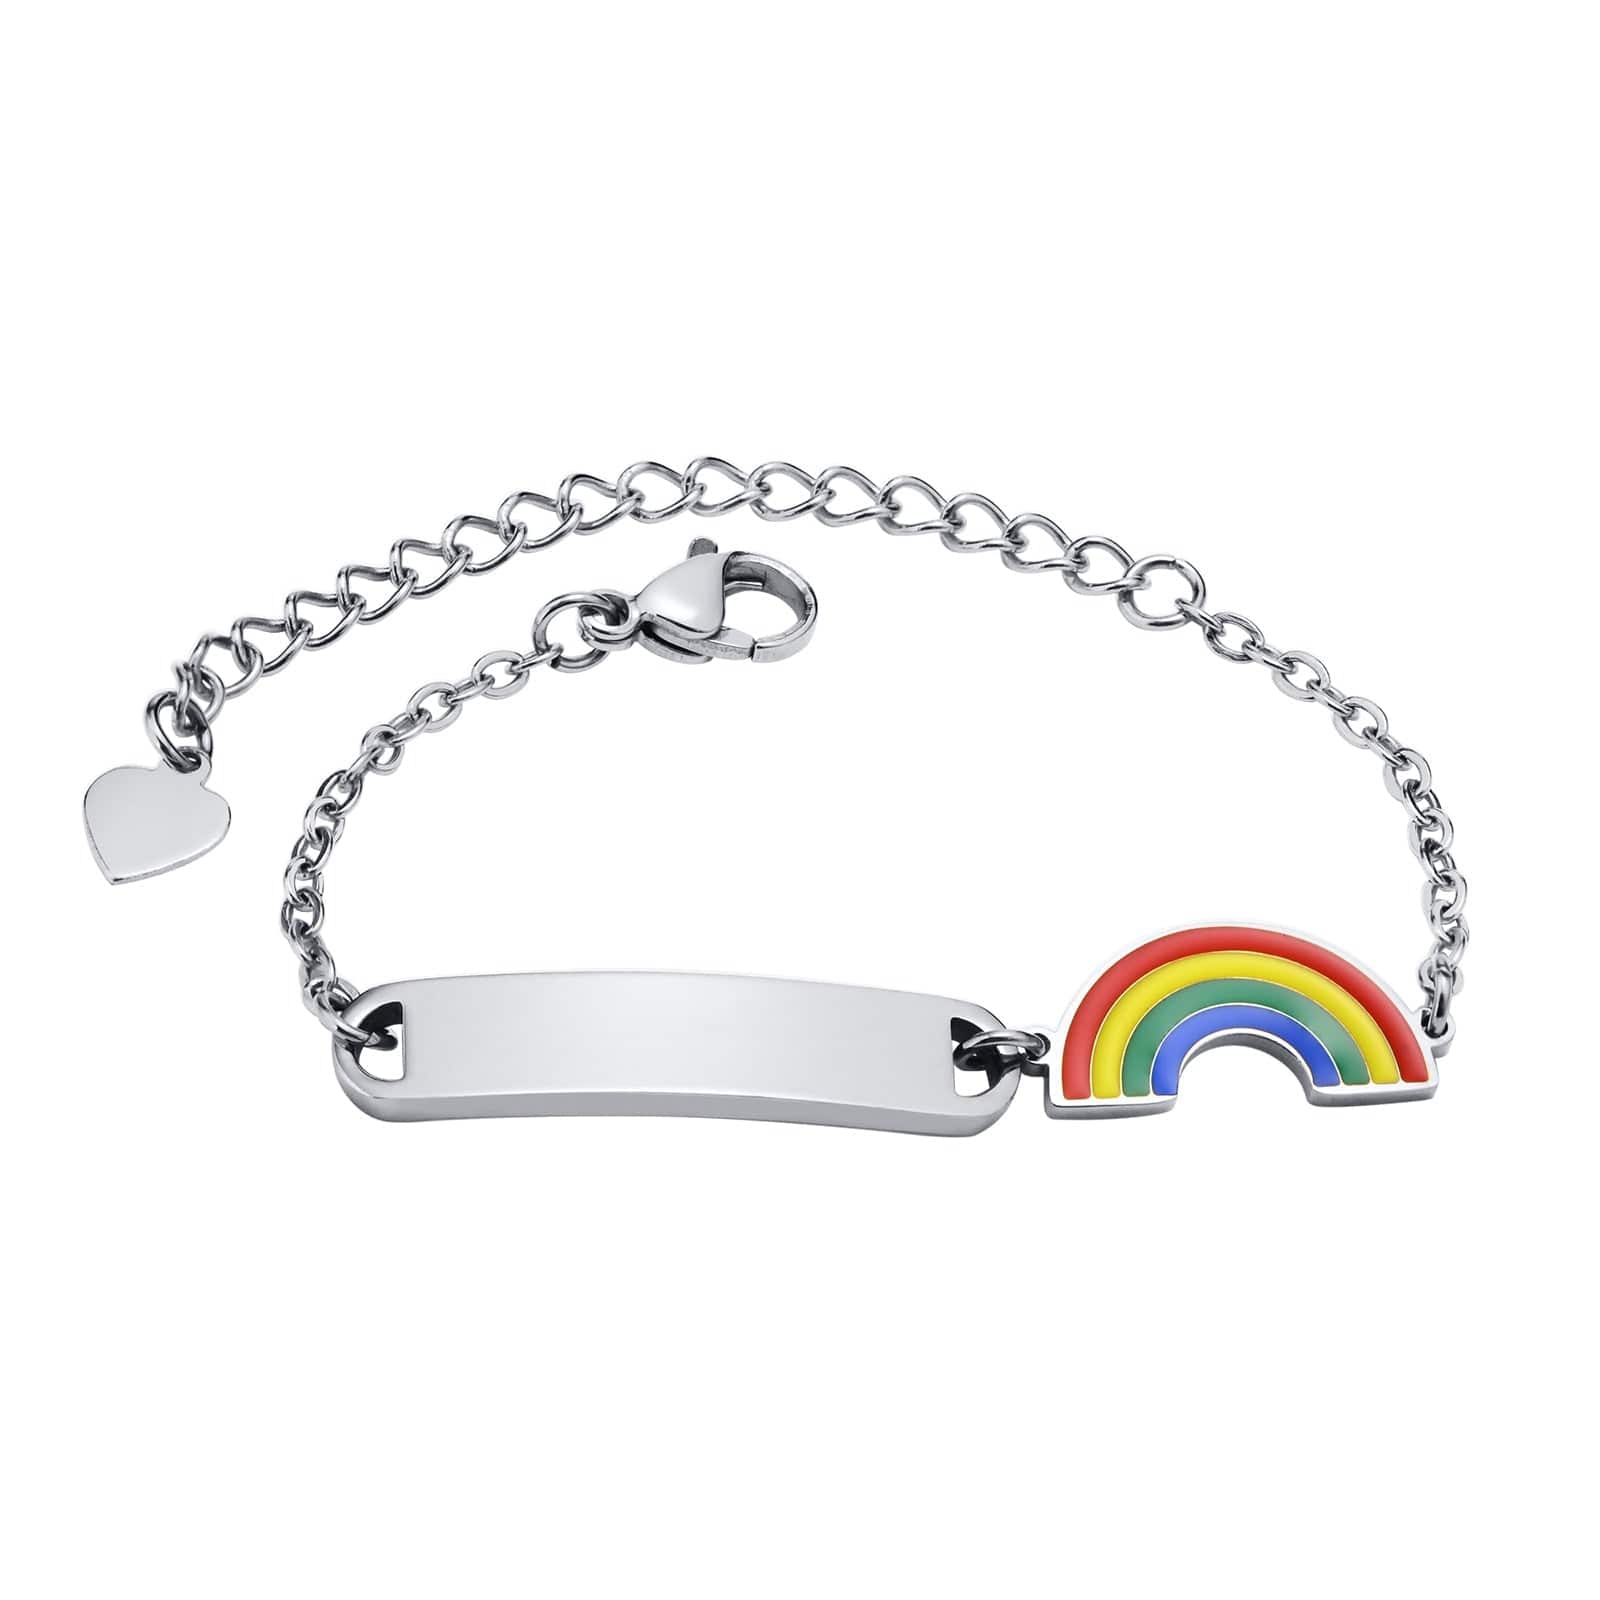 VVS Jewelry hip hop jewelry Silver Rainbow Custom Baby Engraved Name Adjustable Bracelet with Charm